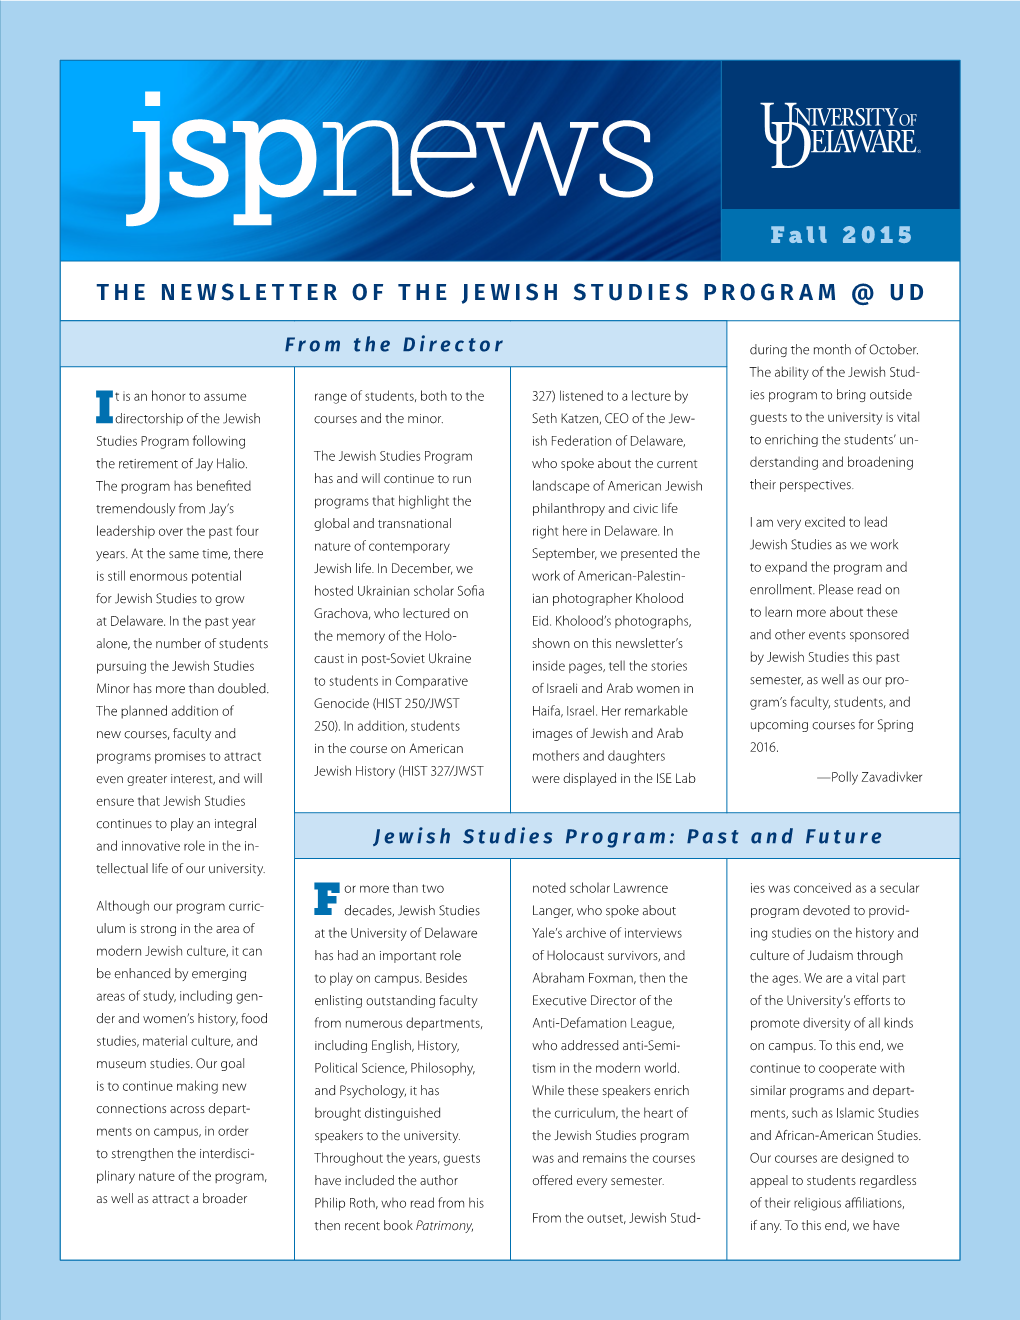 THE NEWSLETTER of the JEWISH STUDIES PROGRAM @ UD Fall 2015